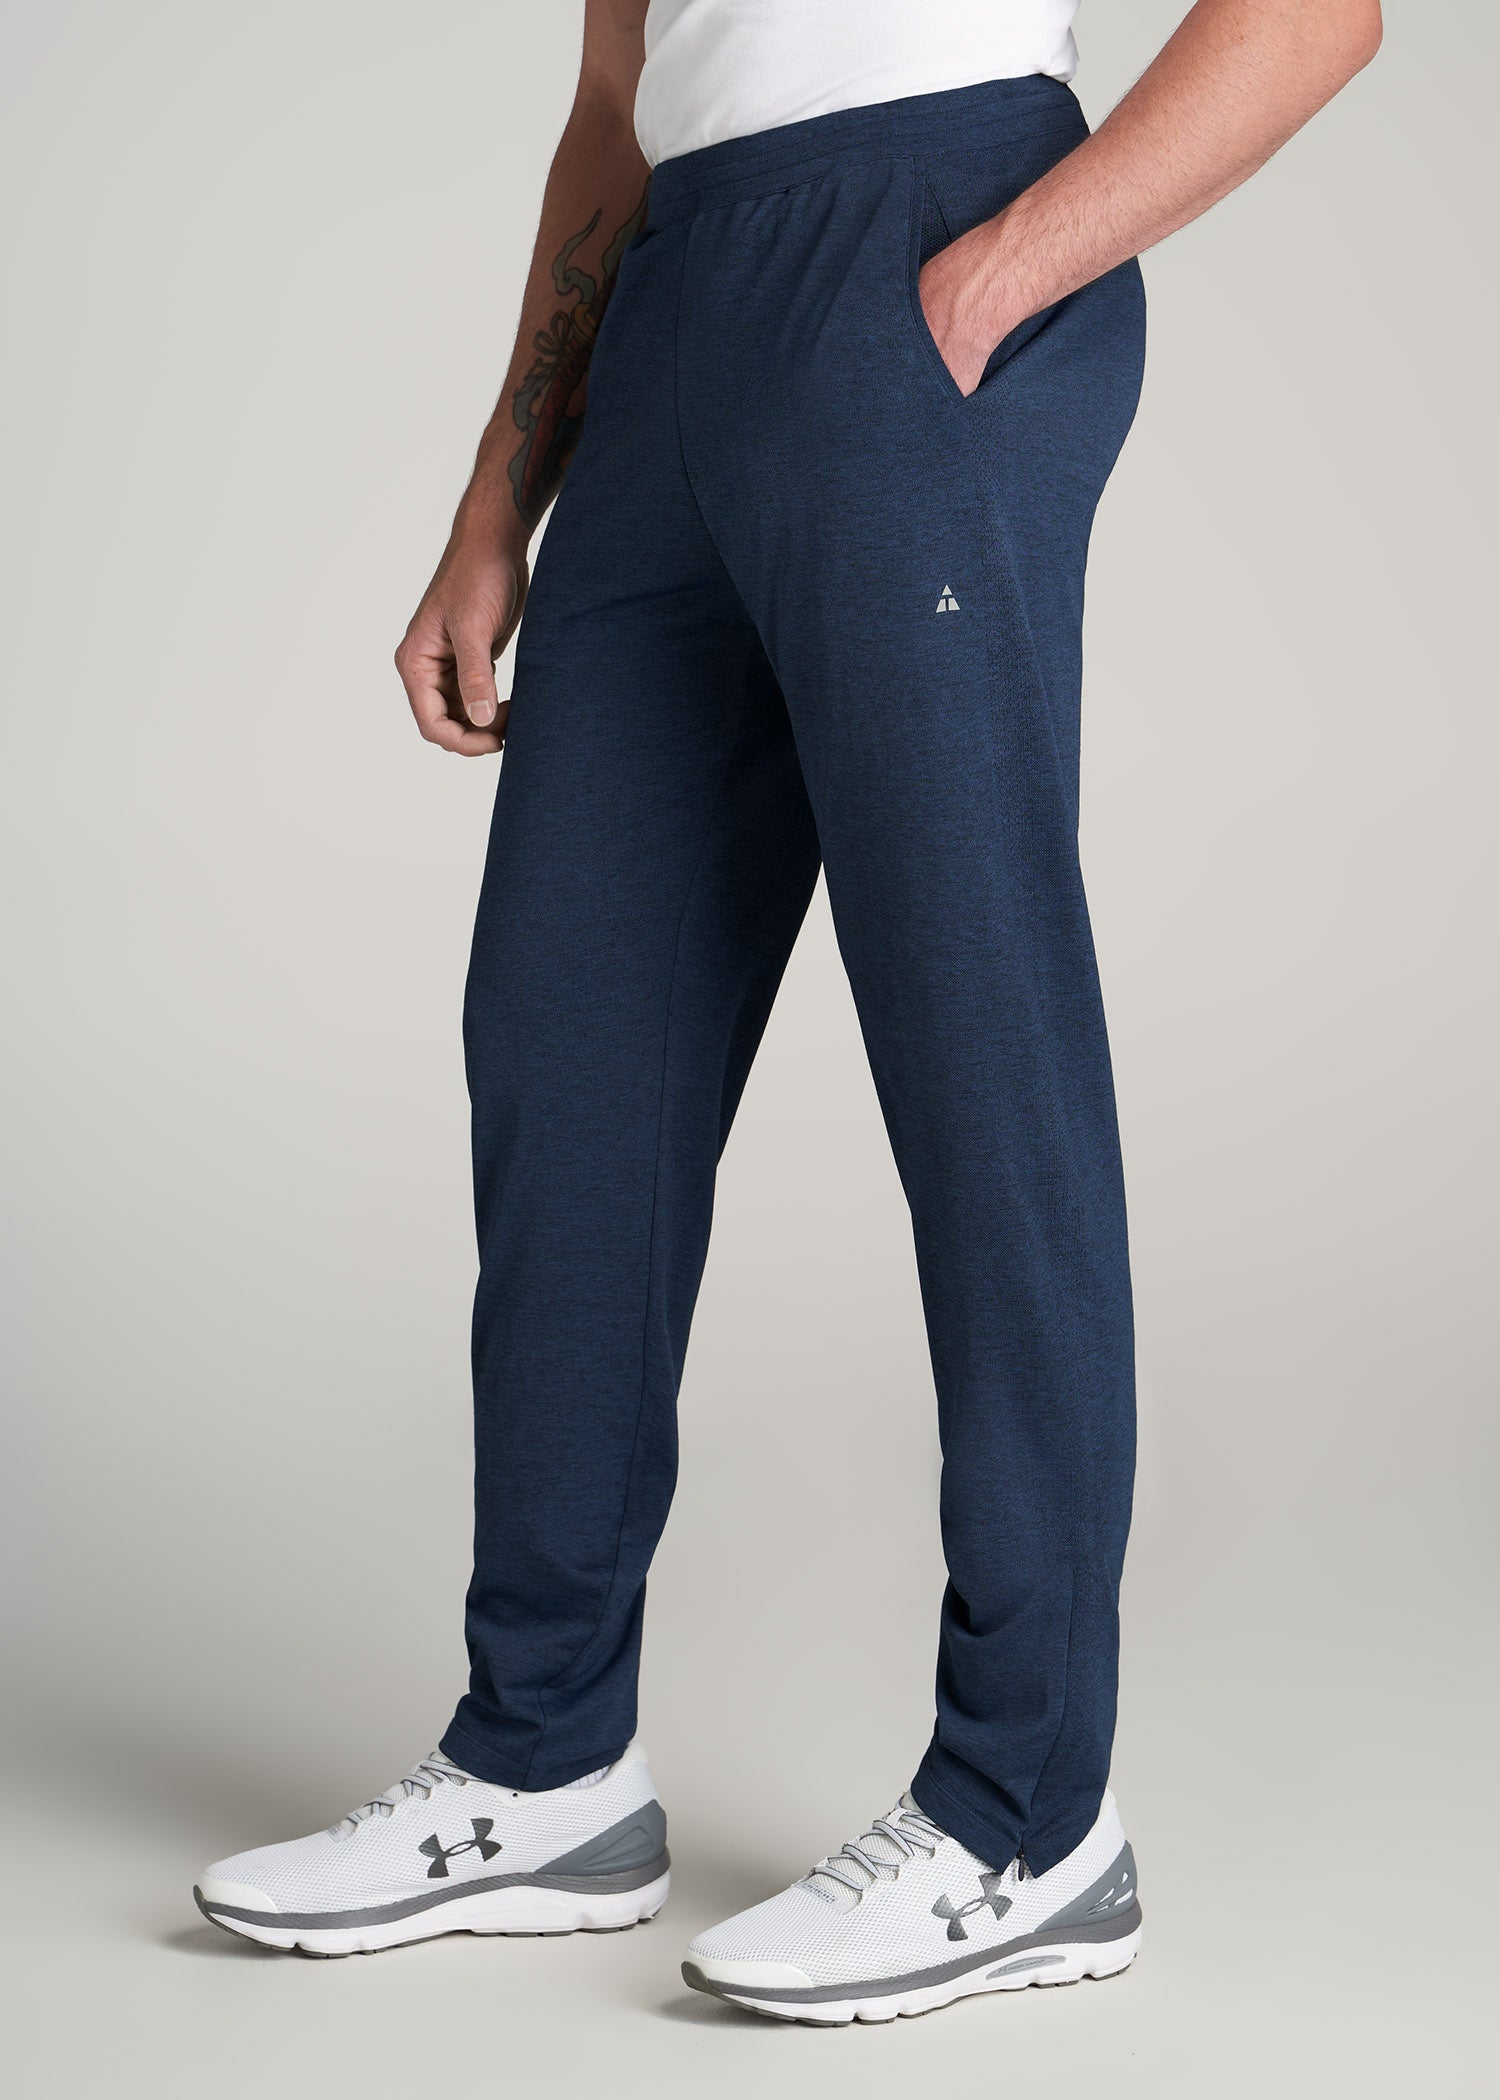 A.T. Performance Zip Bottom Pants for Tall Men in Navy Mix